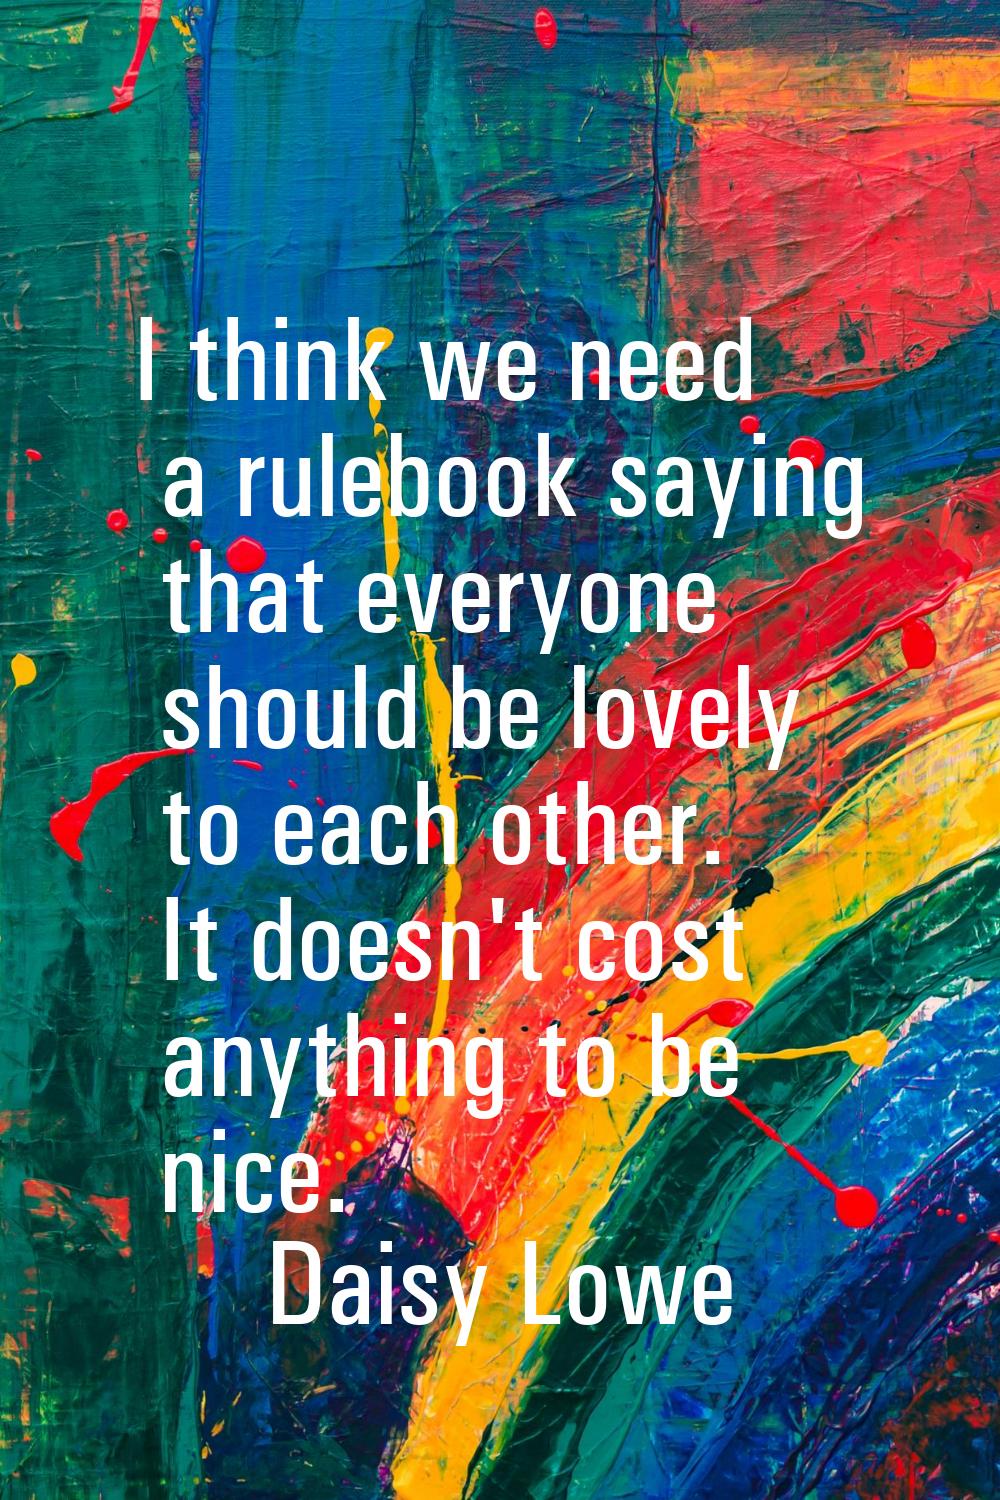 I think we need a rulebook saying that everyone should be lovely to each other. It doesn't cost any